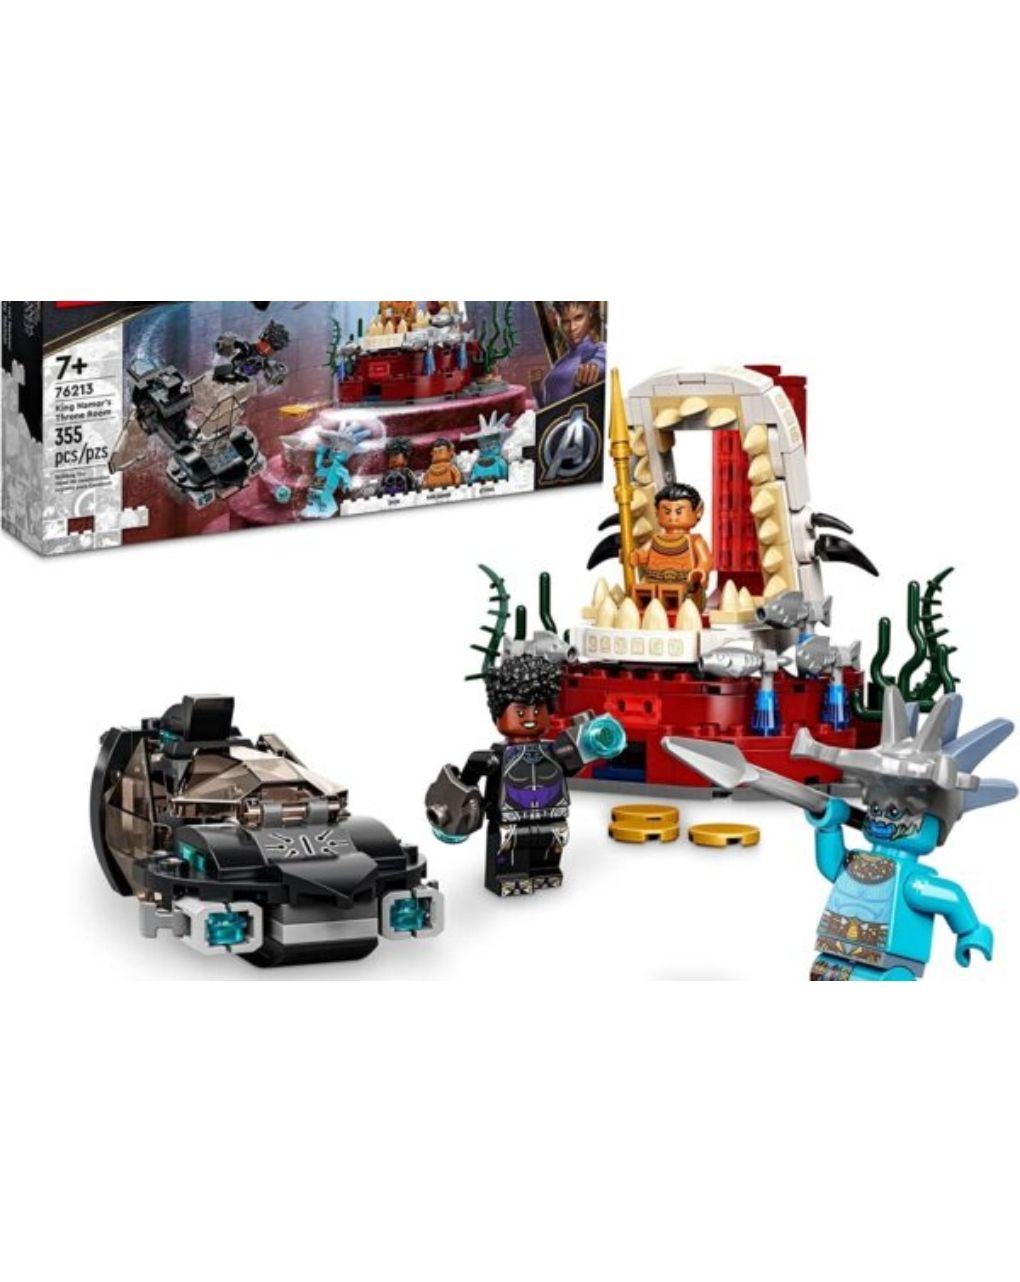 Lego super heroes black panther king namor’s throne room 76213 - Lego